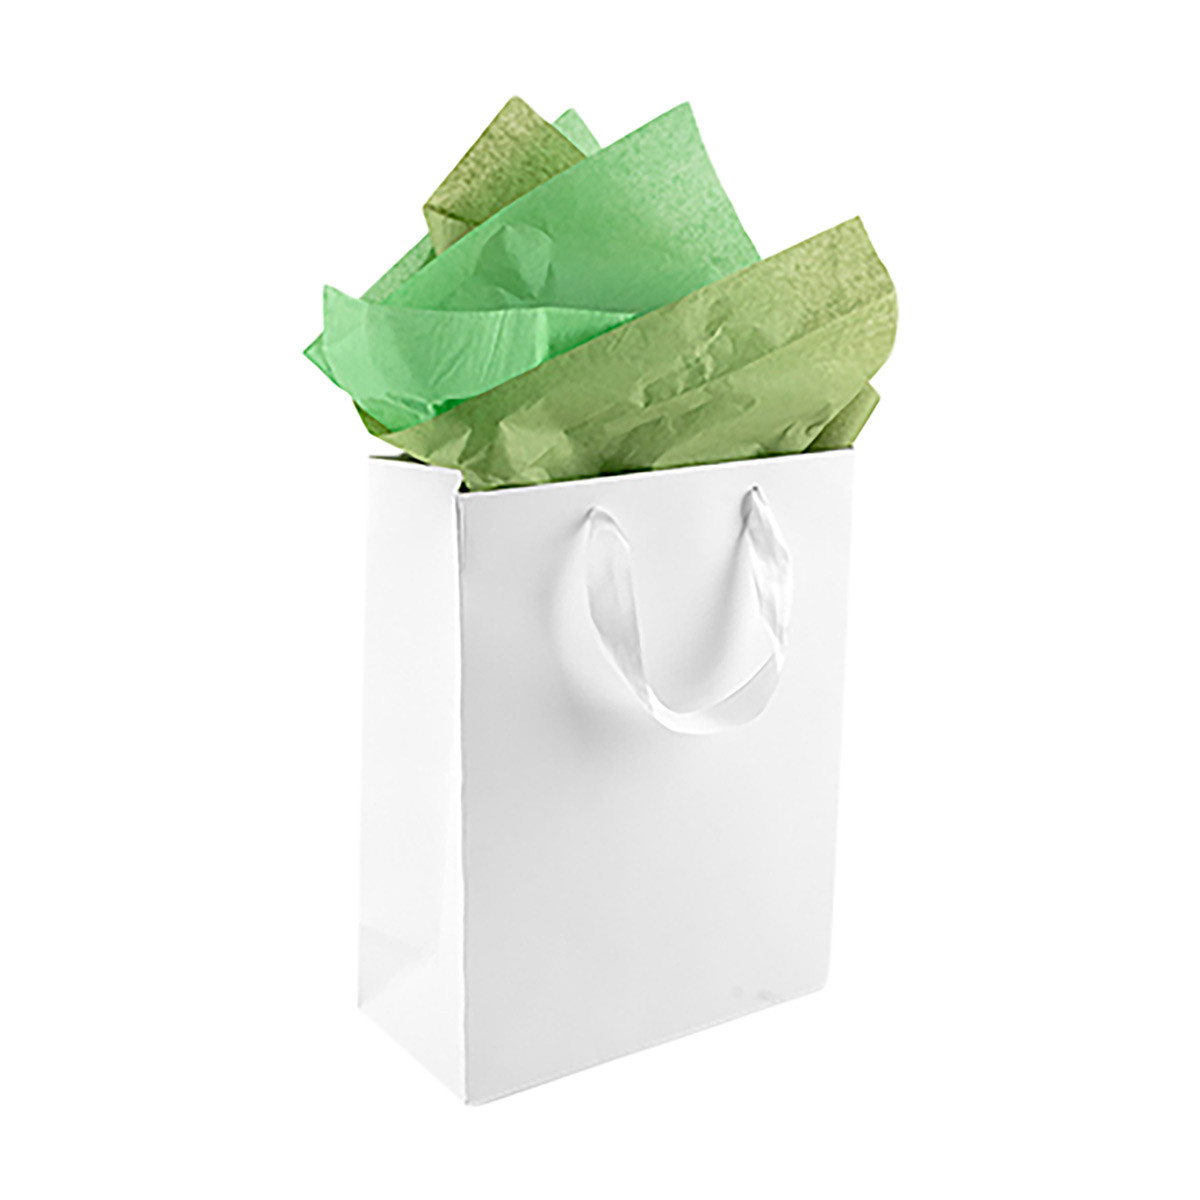 321 Party! Color Gift Tissue, 25 ct